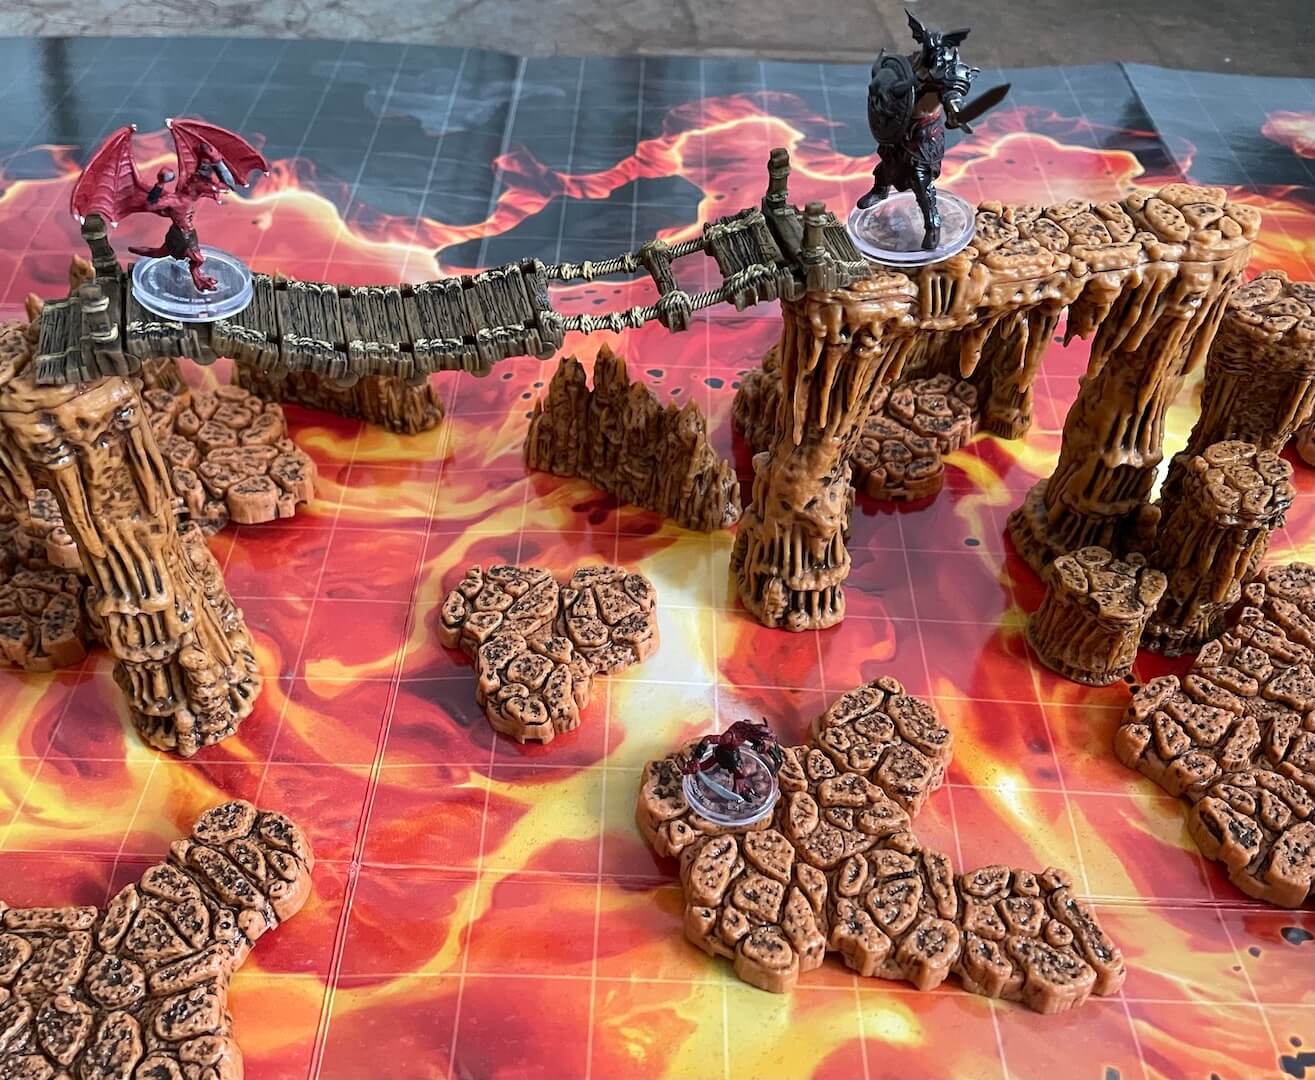 Now we've raised the stakes and upped the height on our battle with an expansion to the Caverns Set of WizKids WarLock Dungeon Tiles.